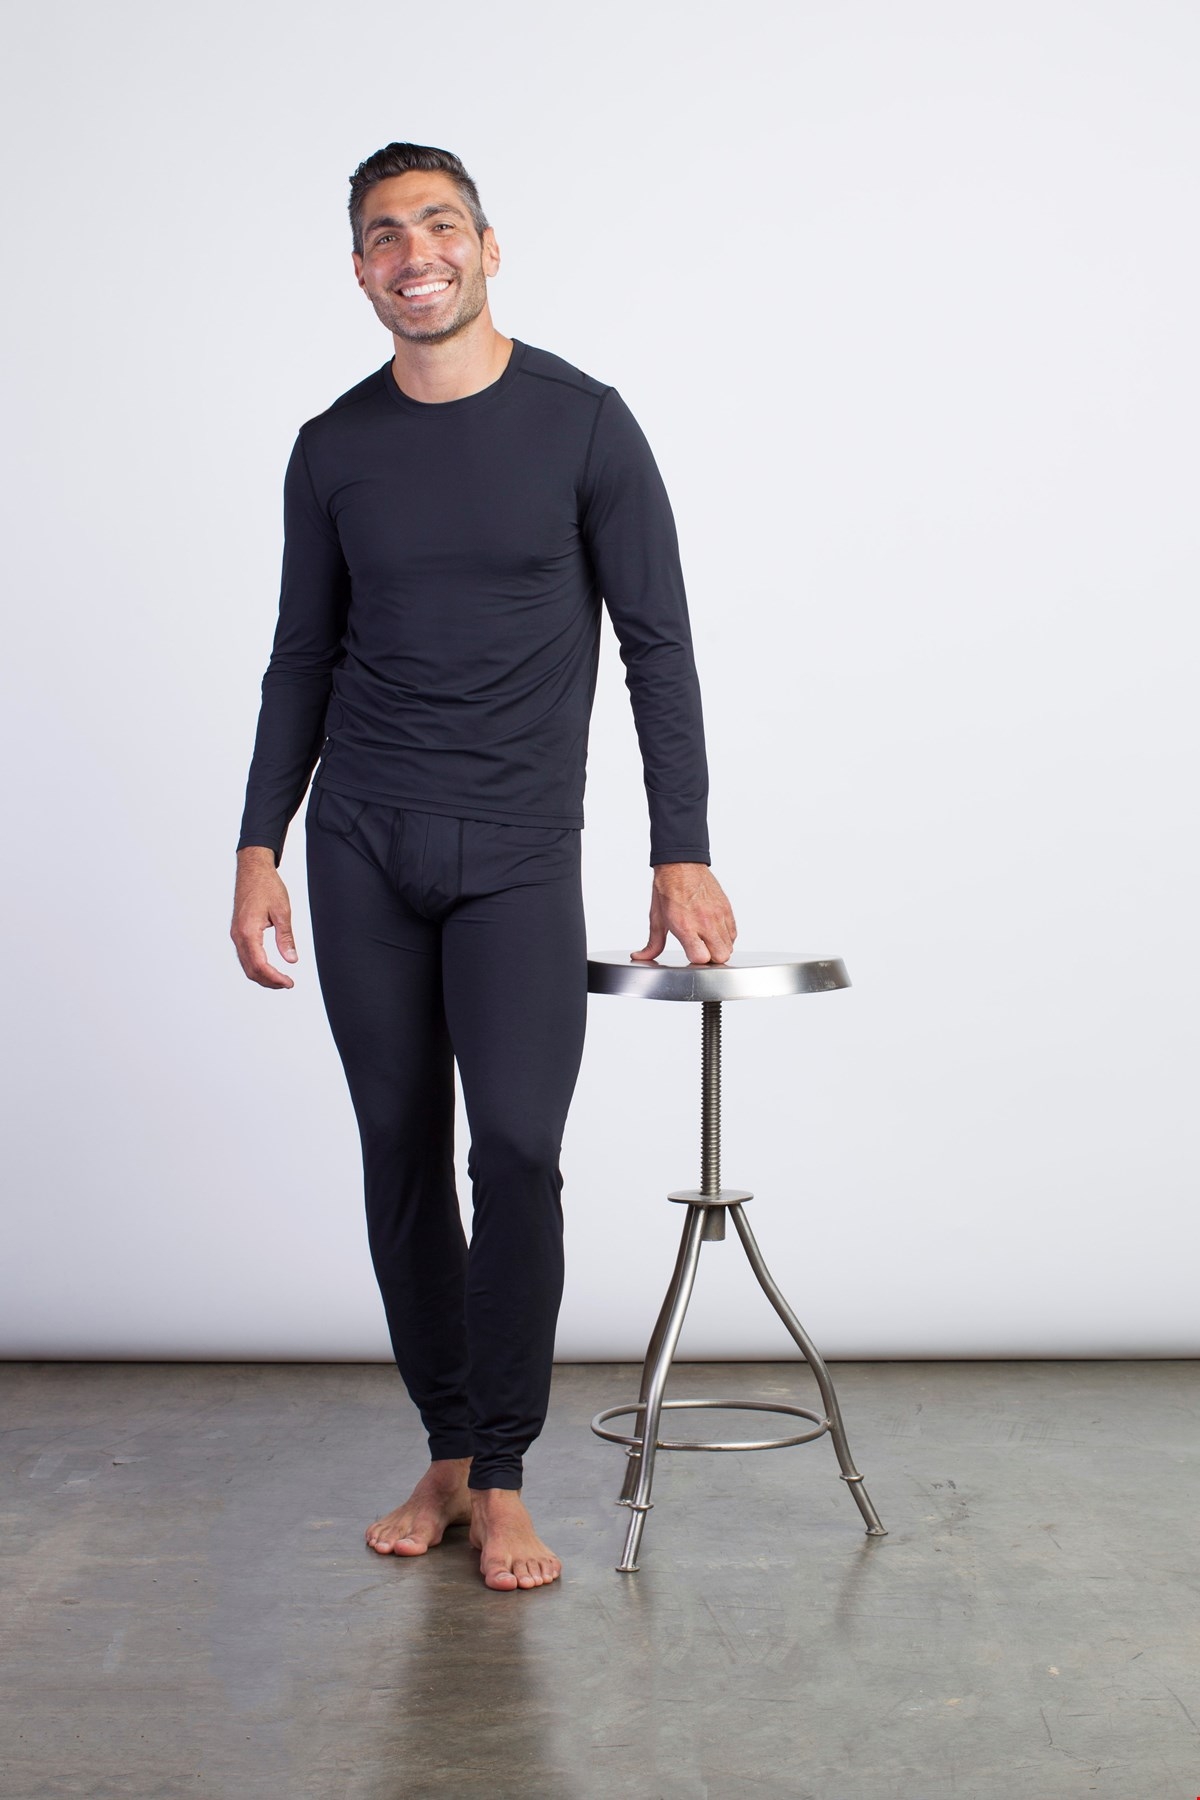 ExOfficio® unveils new base layer collection based on their award-winning underwear collection